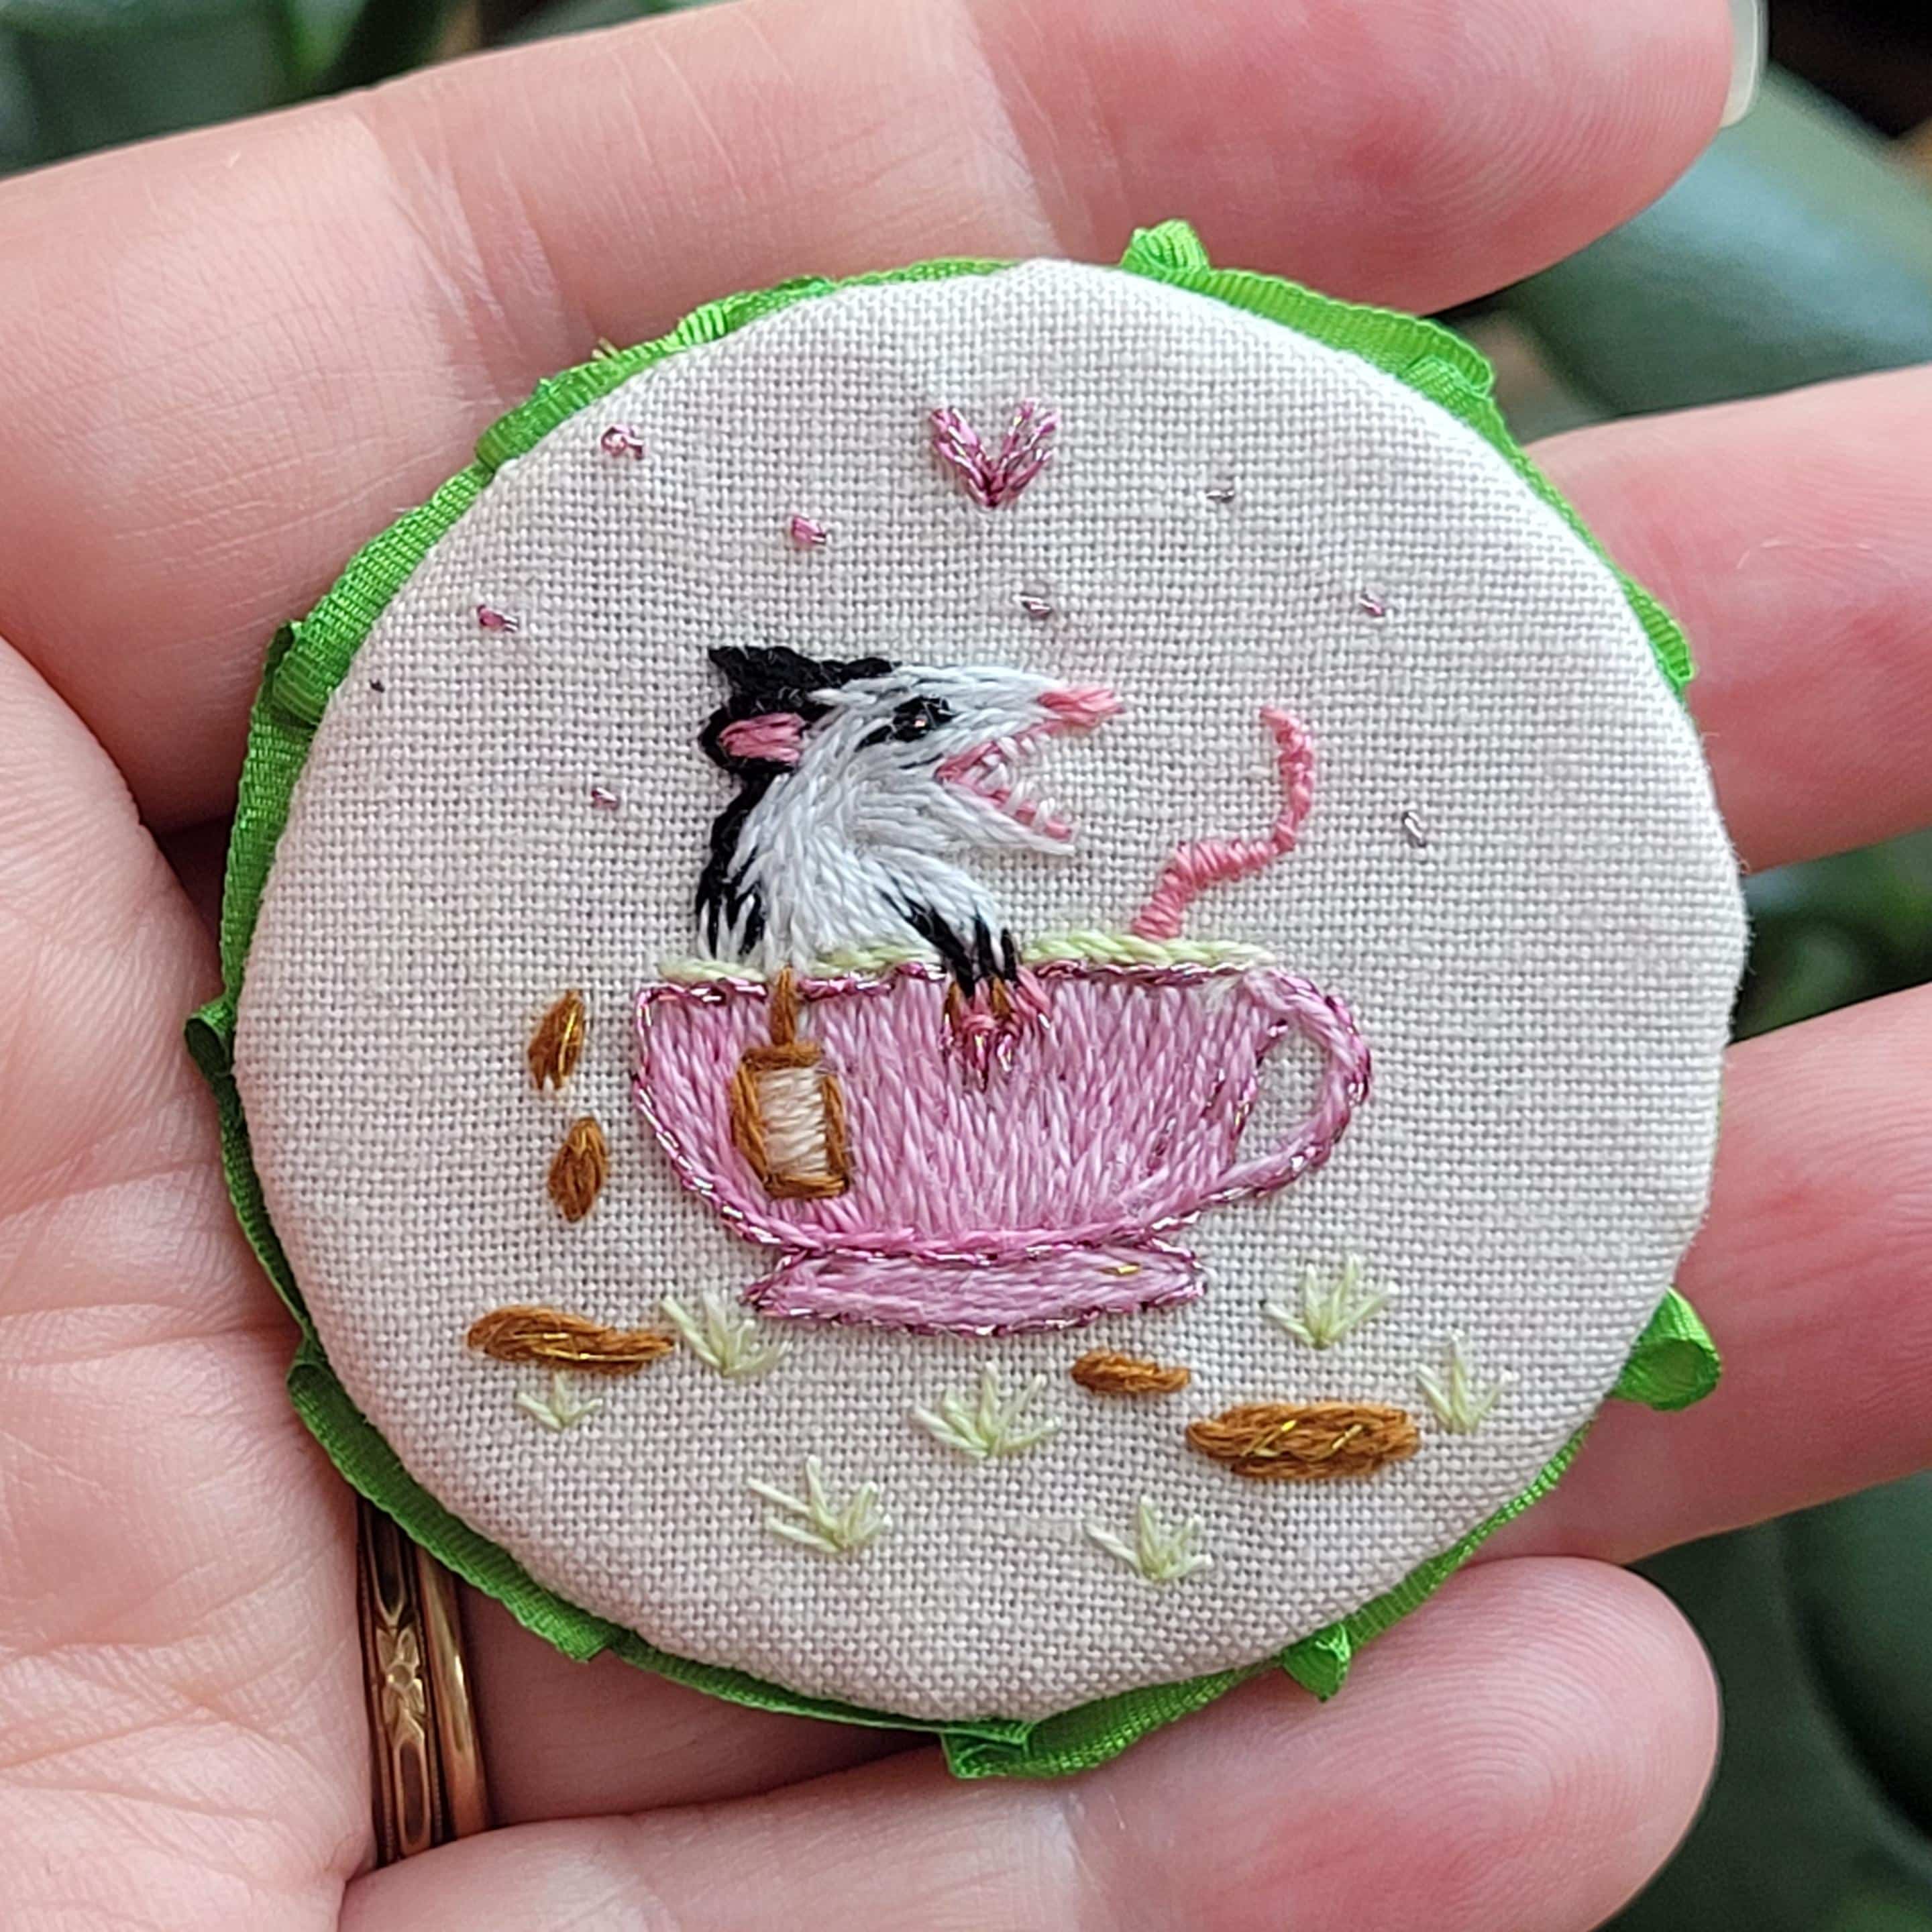 Pin on embroidery